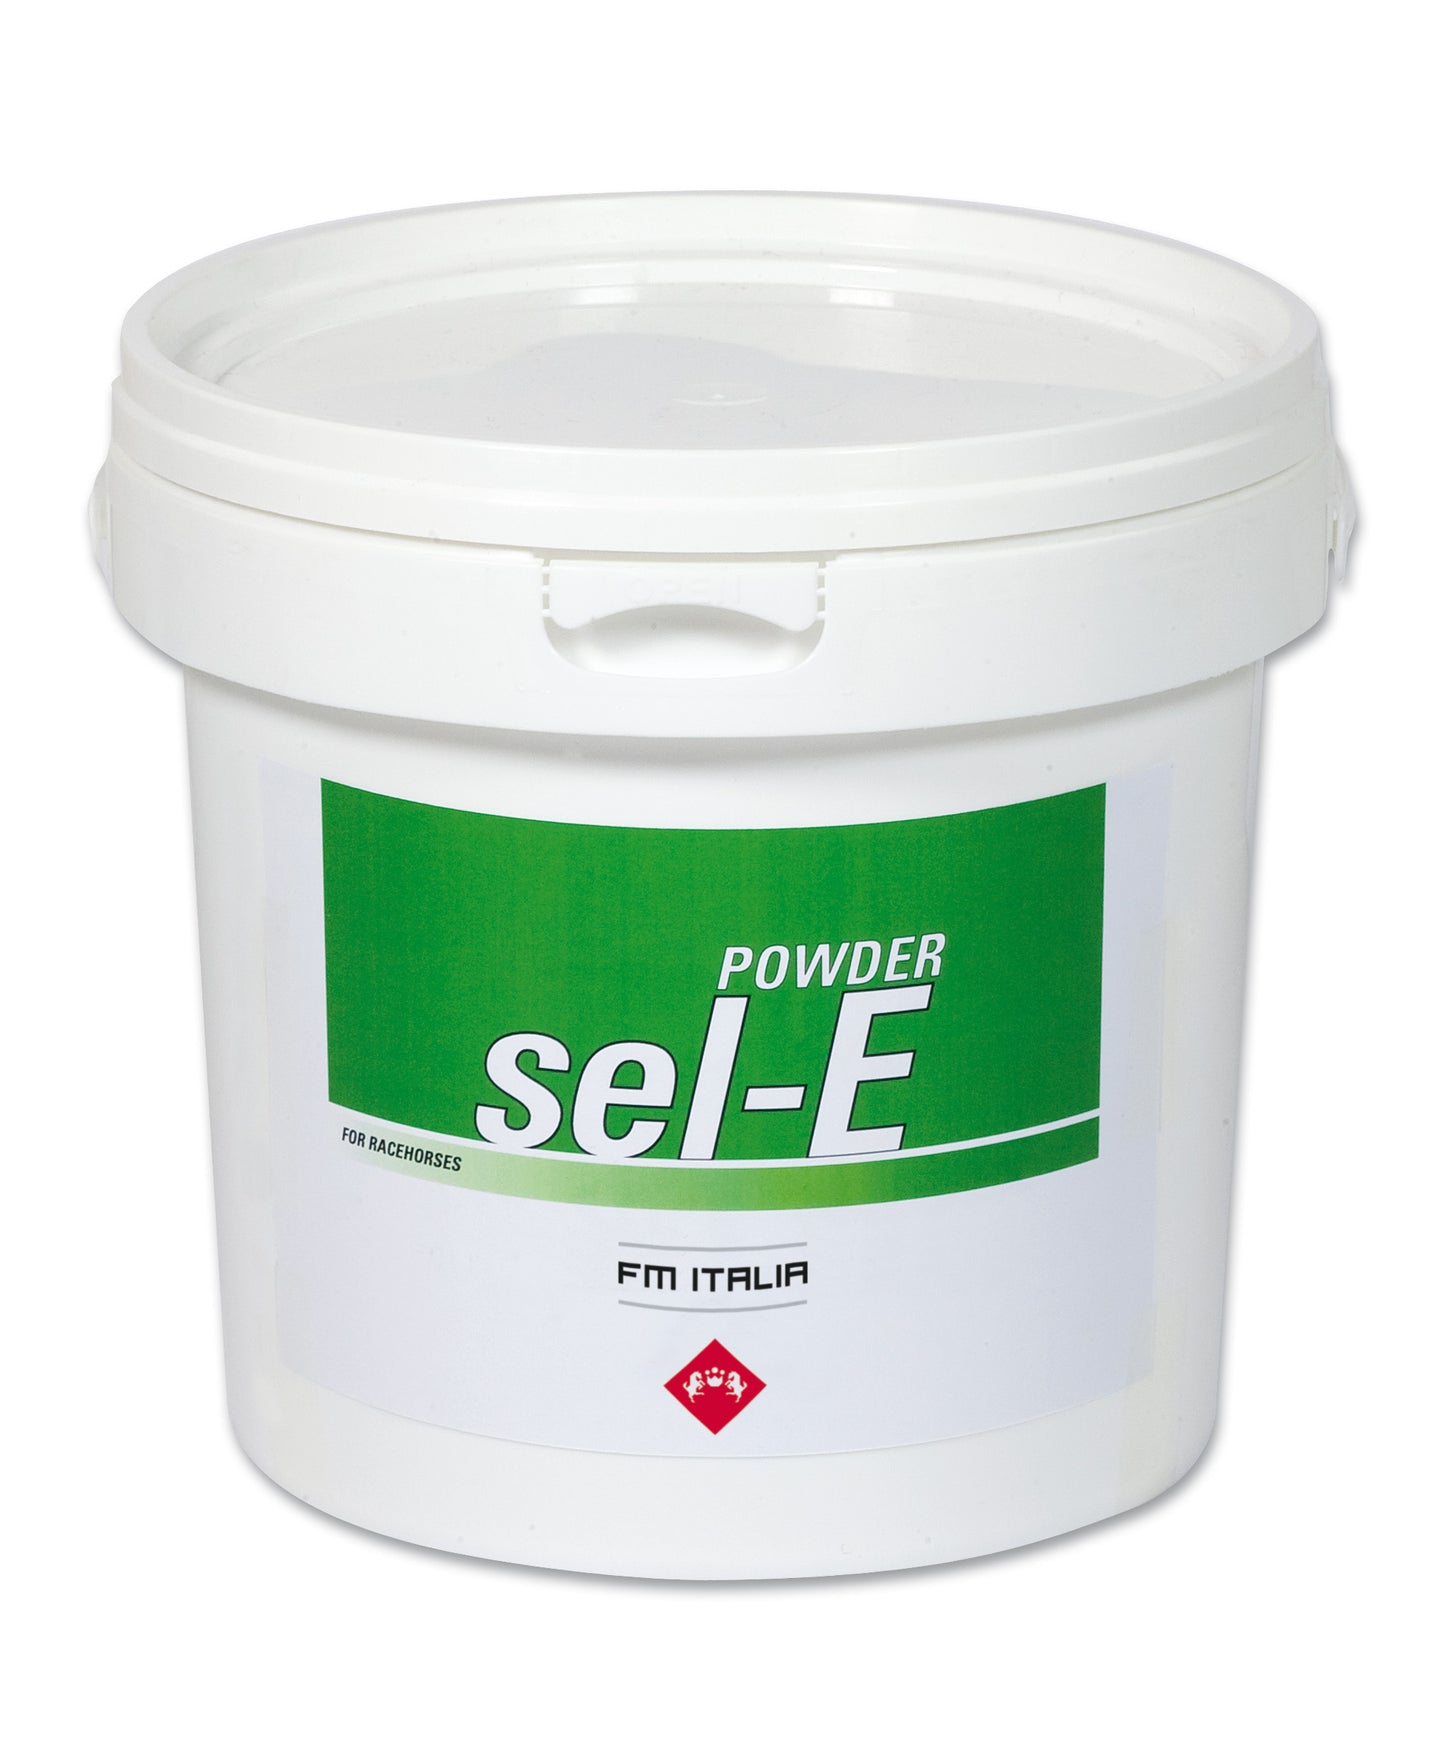 SEL-E | Sports Preparation and Recovery Powder for Horses